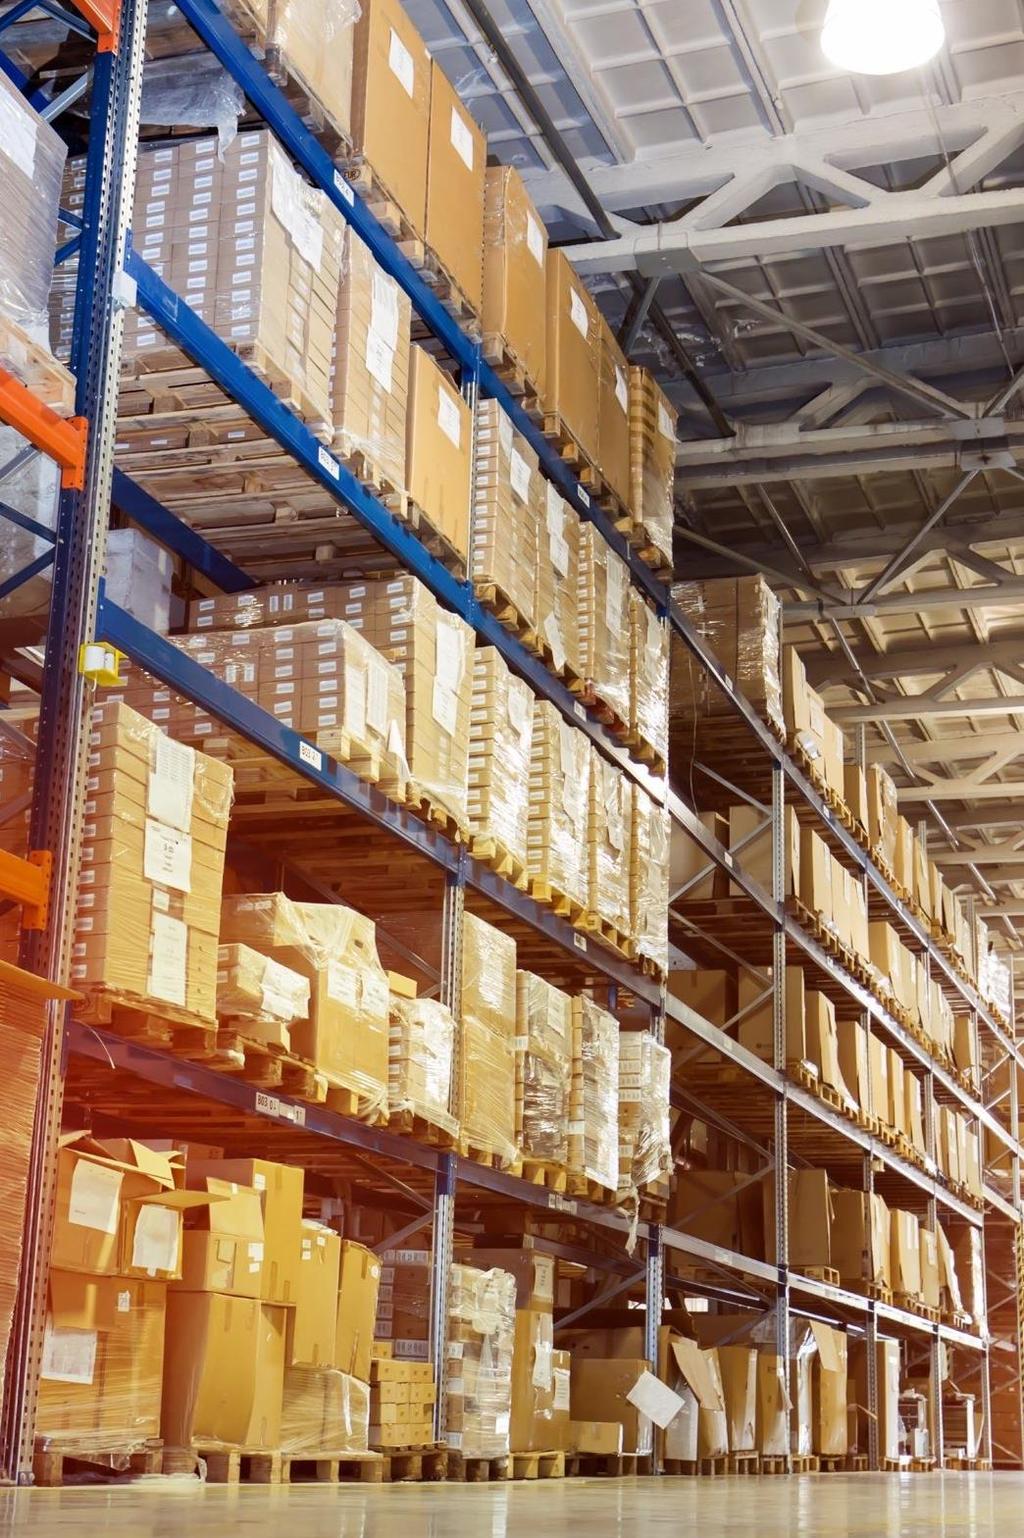 Contract Based Warehousing Contract based warehousing is the optimal solution for companies that require a customized distribution platform and a dedicated warehouse facility.